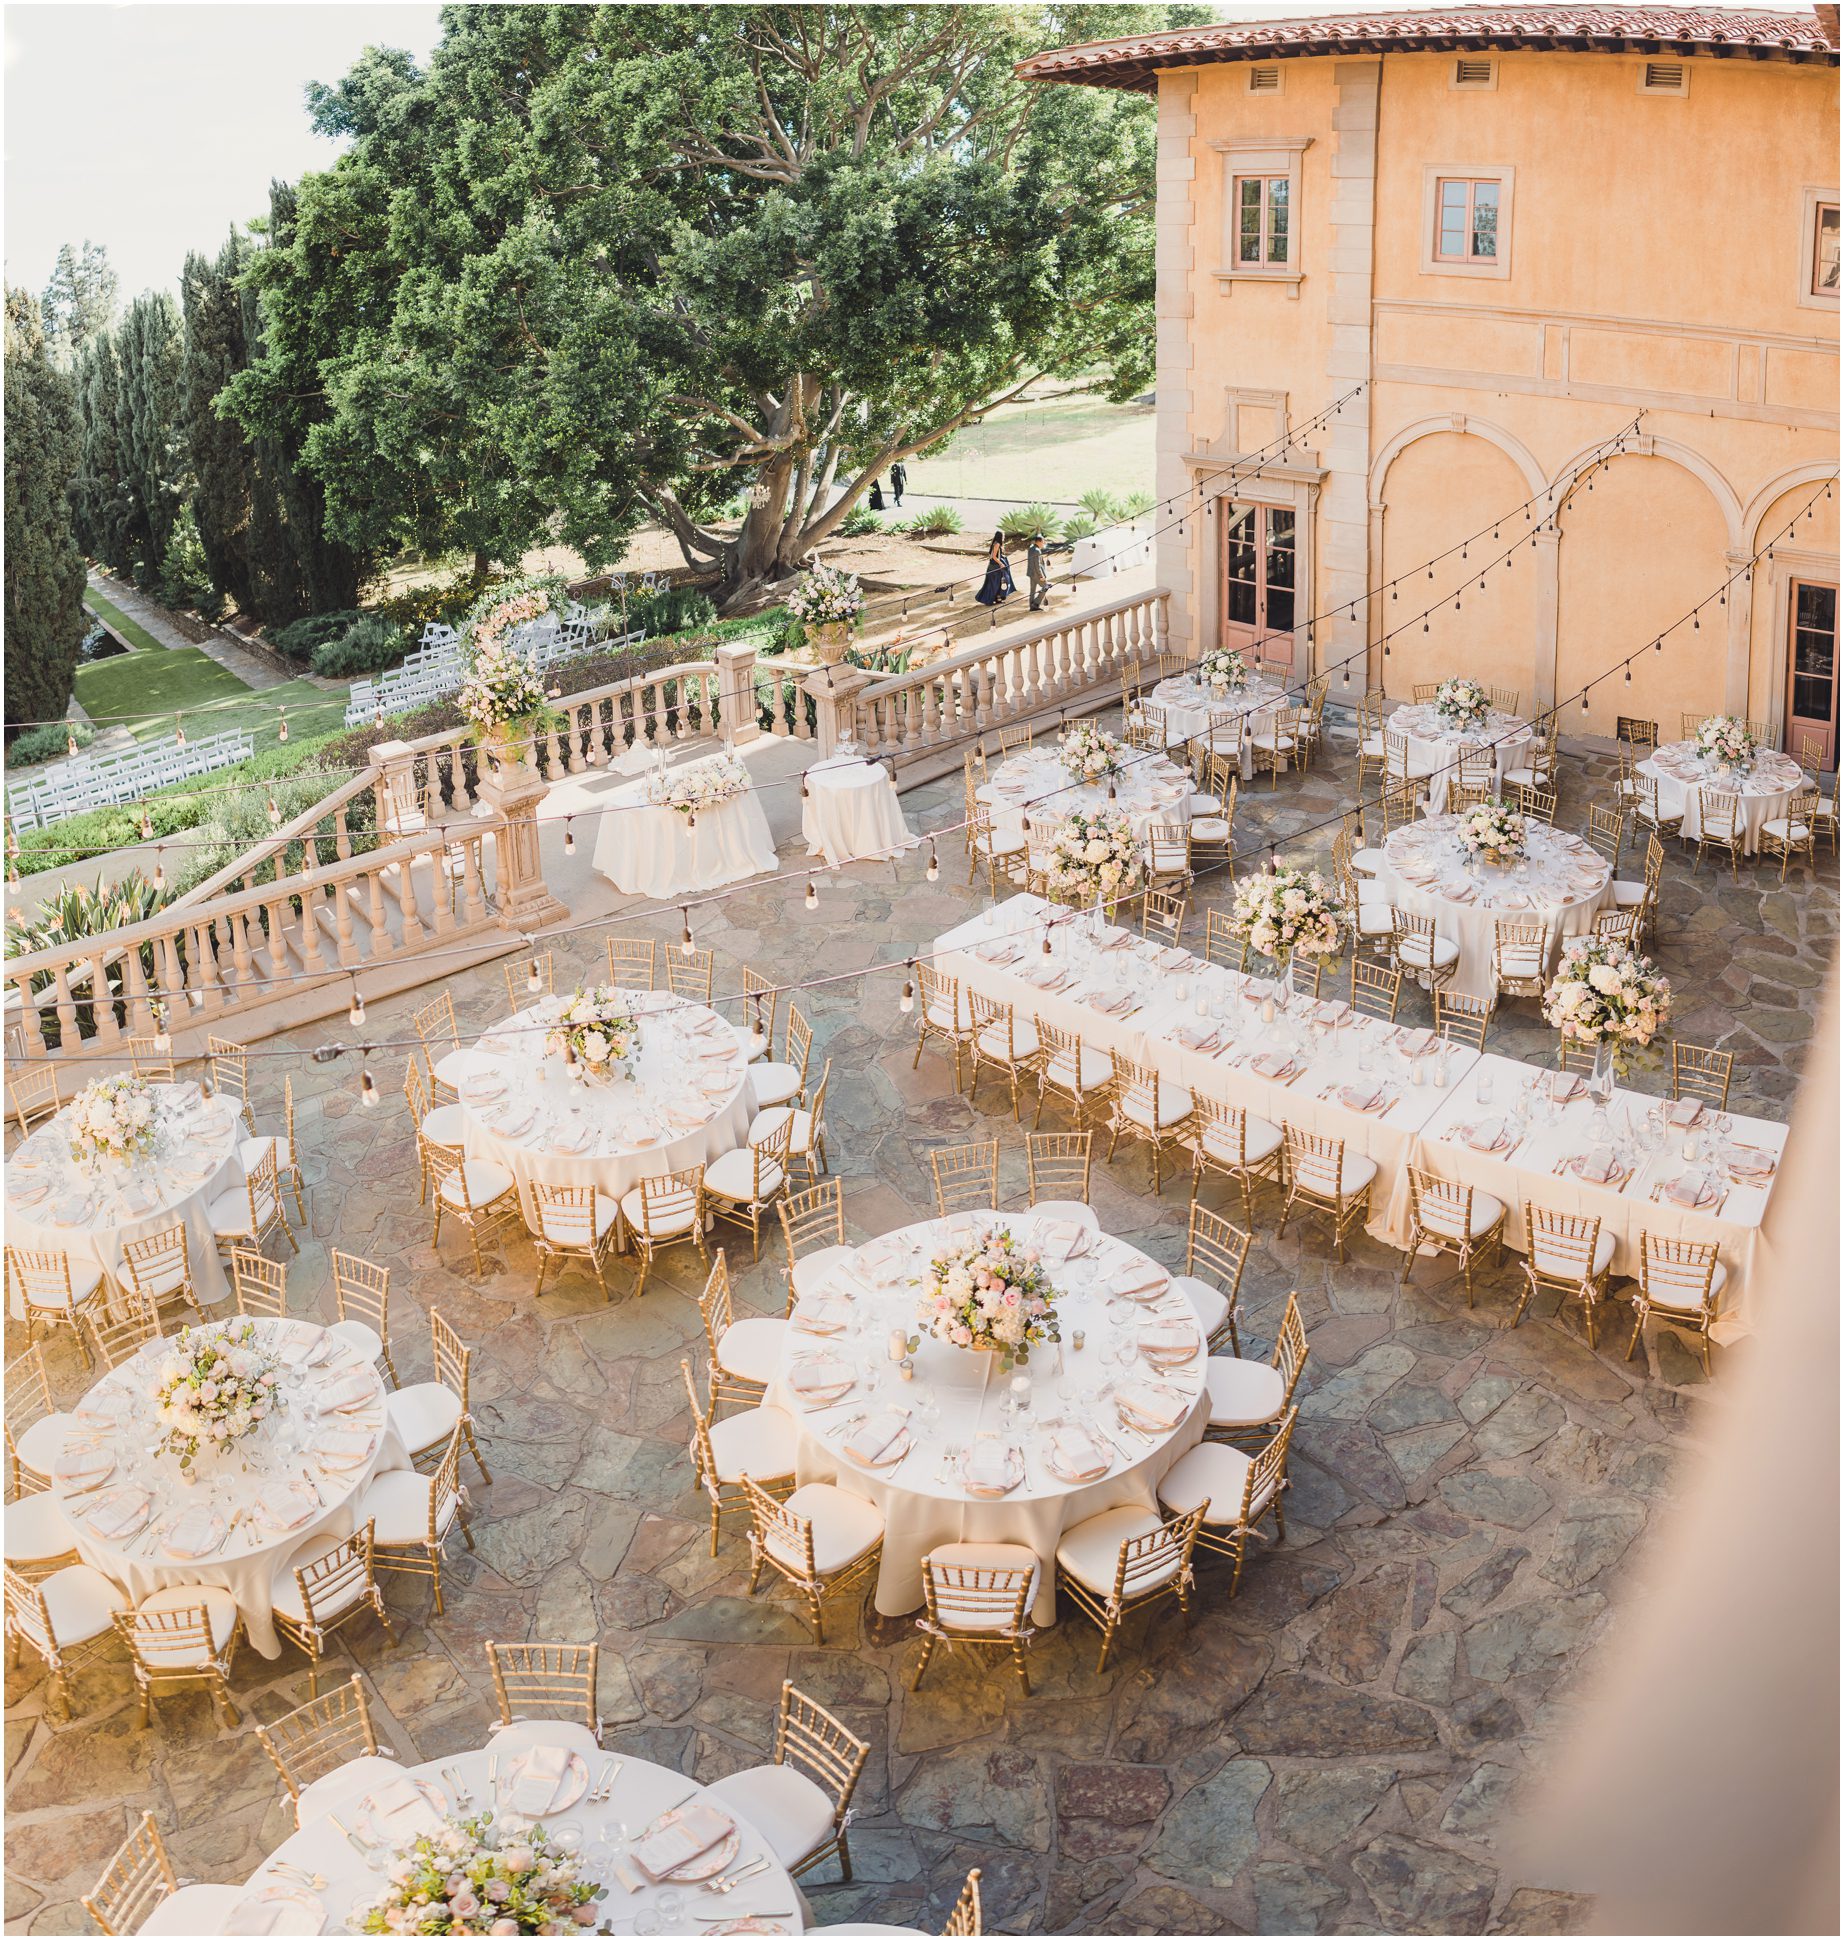 A wedding reception setup on a balcony at a gorgeous Villa del sol d'orzo wedding. The wedding features gold chairs, pink and white flowers, hanging lights, and white tablecloths